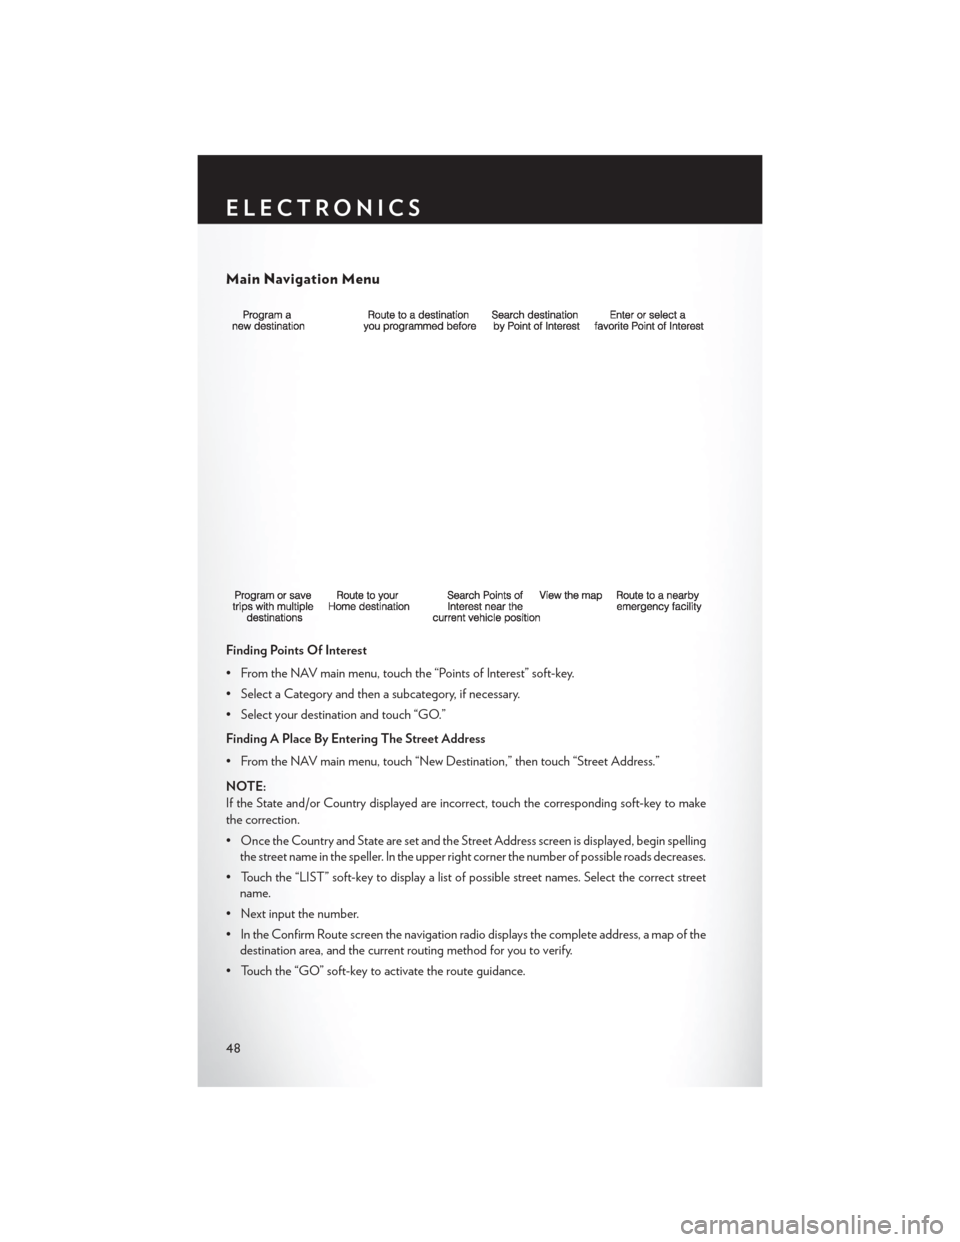 CHRYSLER 200 2013 1.G Service Manual Main Navigation Menu
Finding Points Of Interest
• From the NAV main menu, touch the “Points of Interest” soft-key.
• Select a Category and then a subcategory, if necessary.
• Select your des